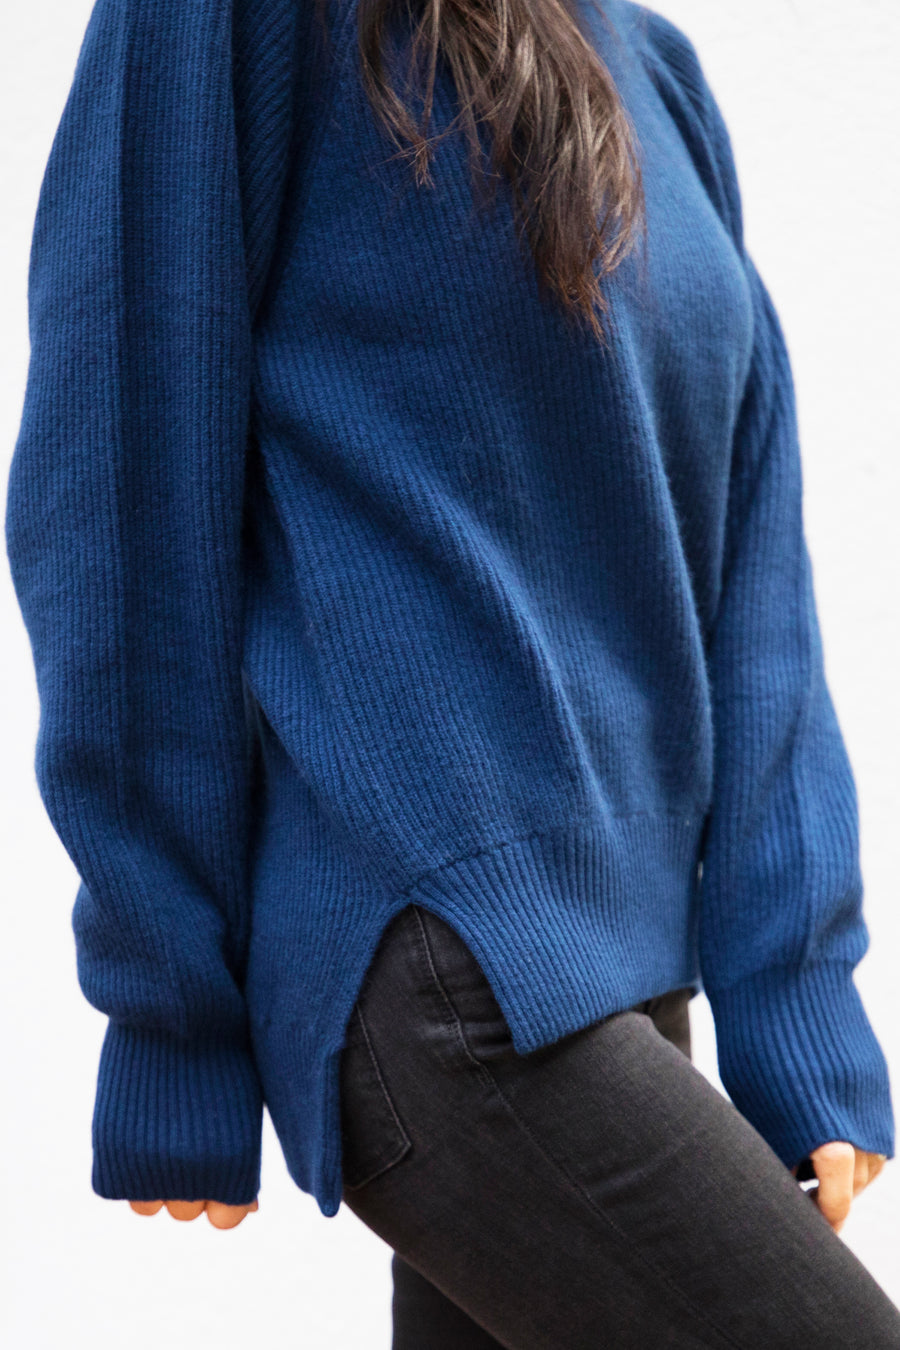 pine cashmere betsy trendy women's 100% pure cashmere crewneck sweater in blue